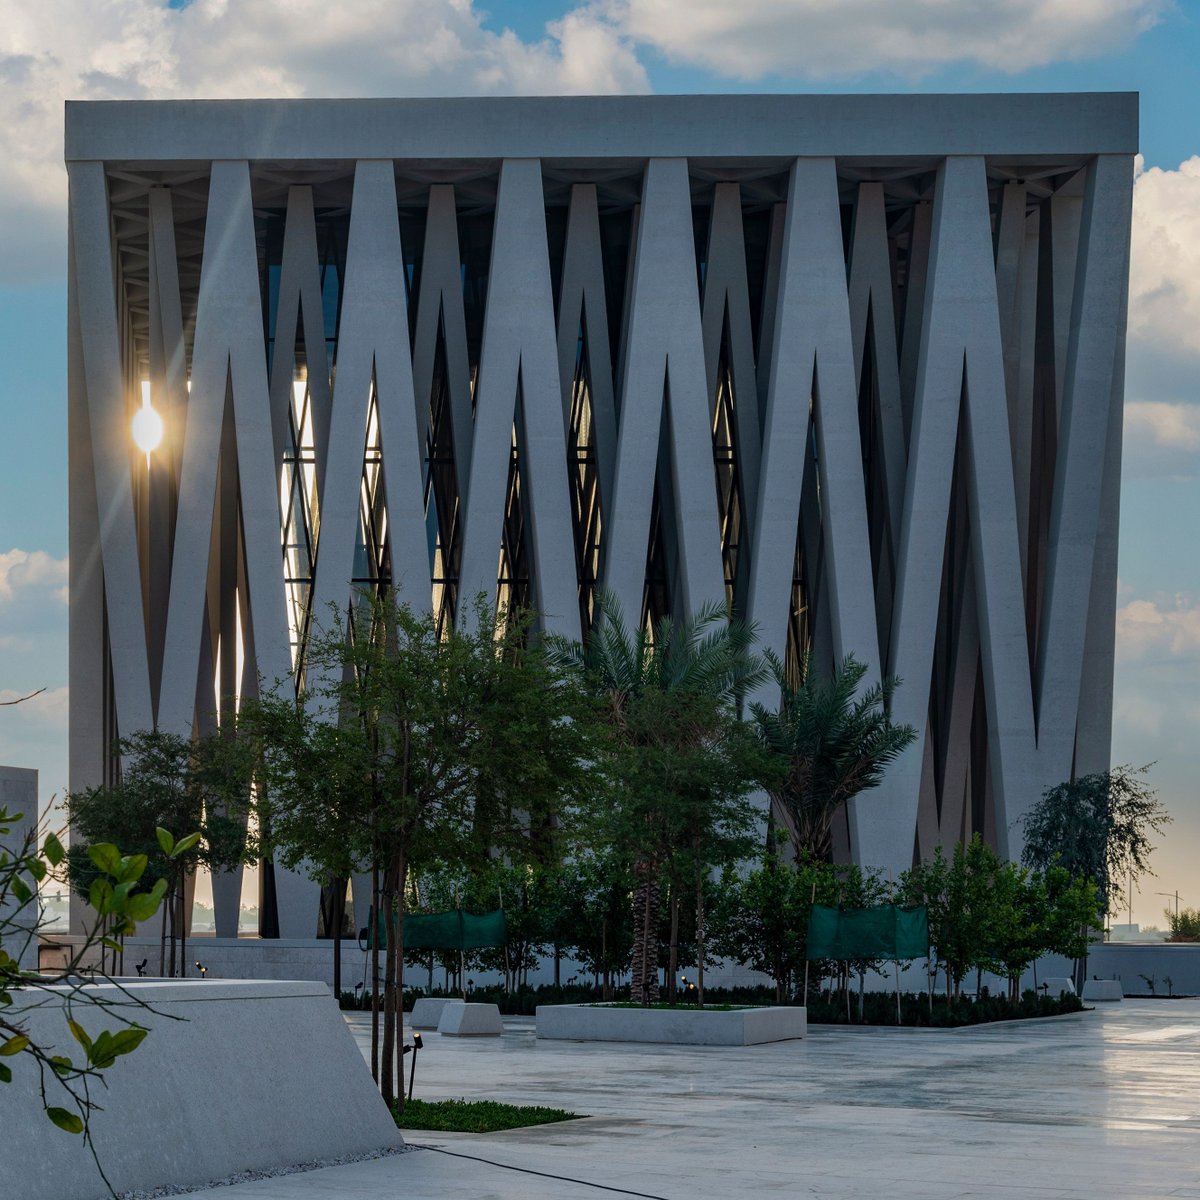 1 year of the Abrahamic Family House. The mosque's façade is formed of seven arches on each side. The church façade is a density of columns symbolizing rays of light. The synagogue’s V-shaped columns reference the overlapping palm fronds on the traditional Jewish prayer shelter.